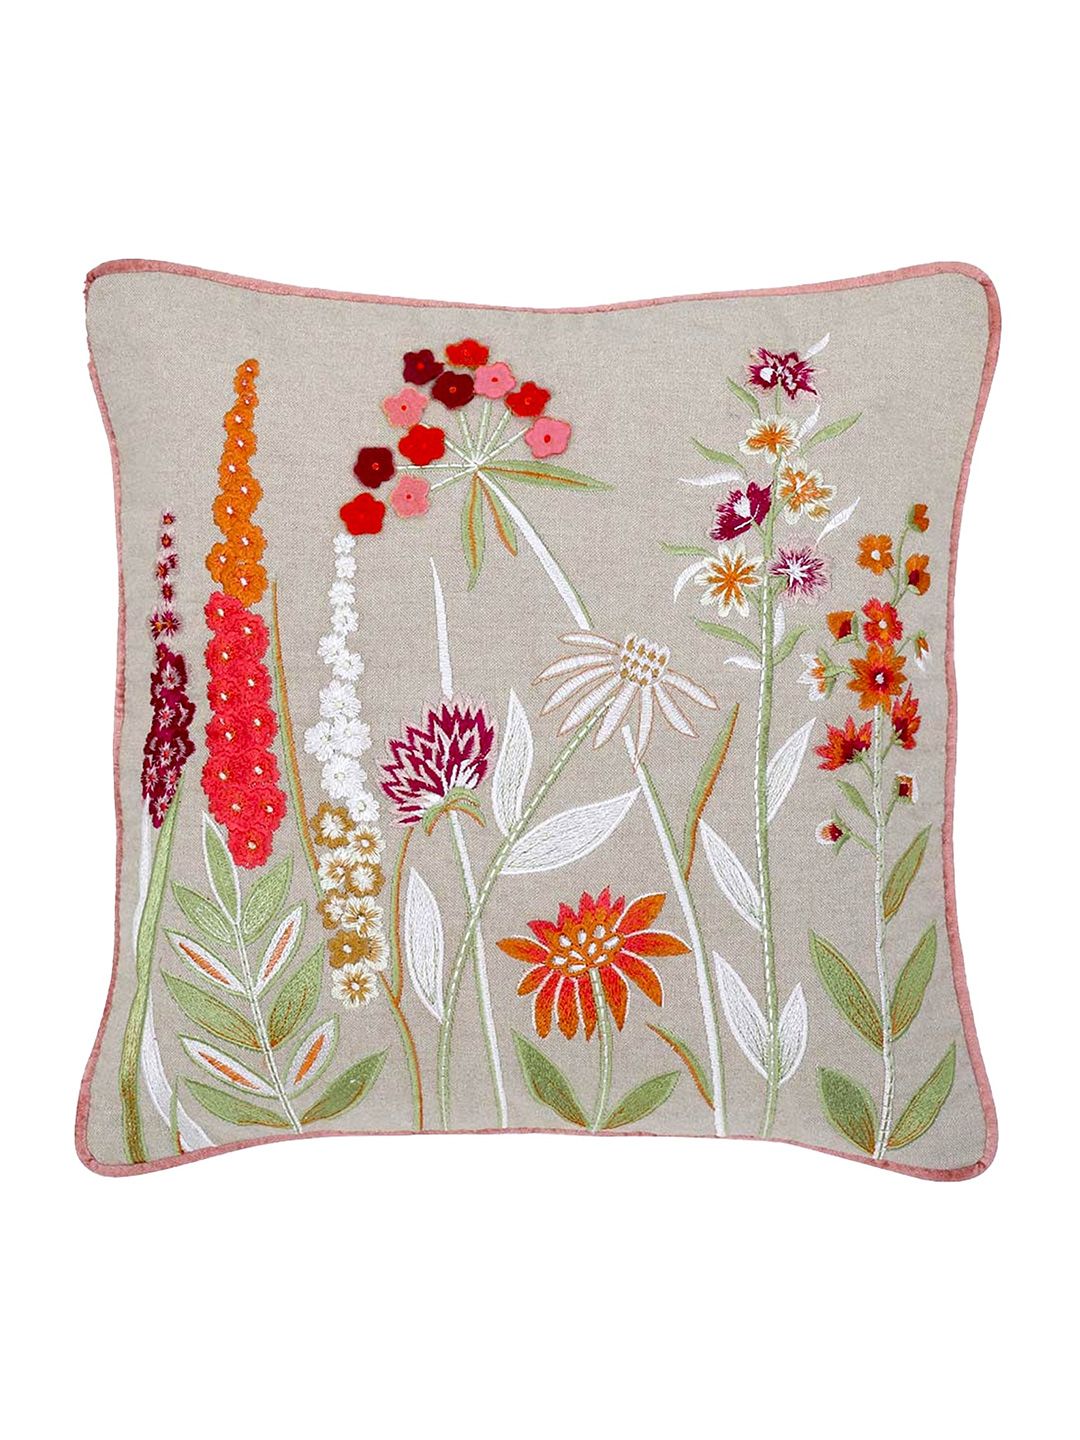 haus & kinder Beige & Pink Embroidered Square Cushion Covers Price in India